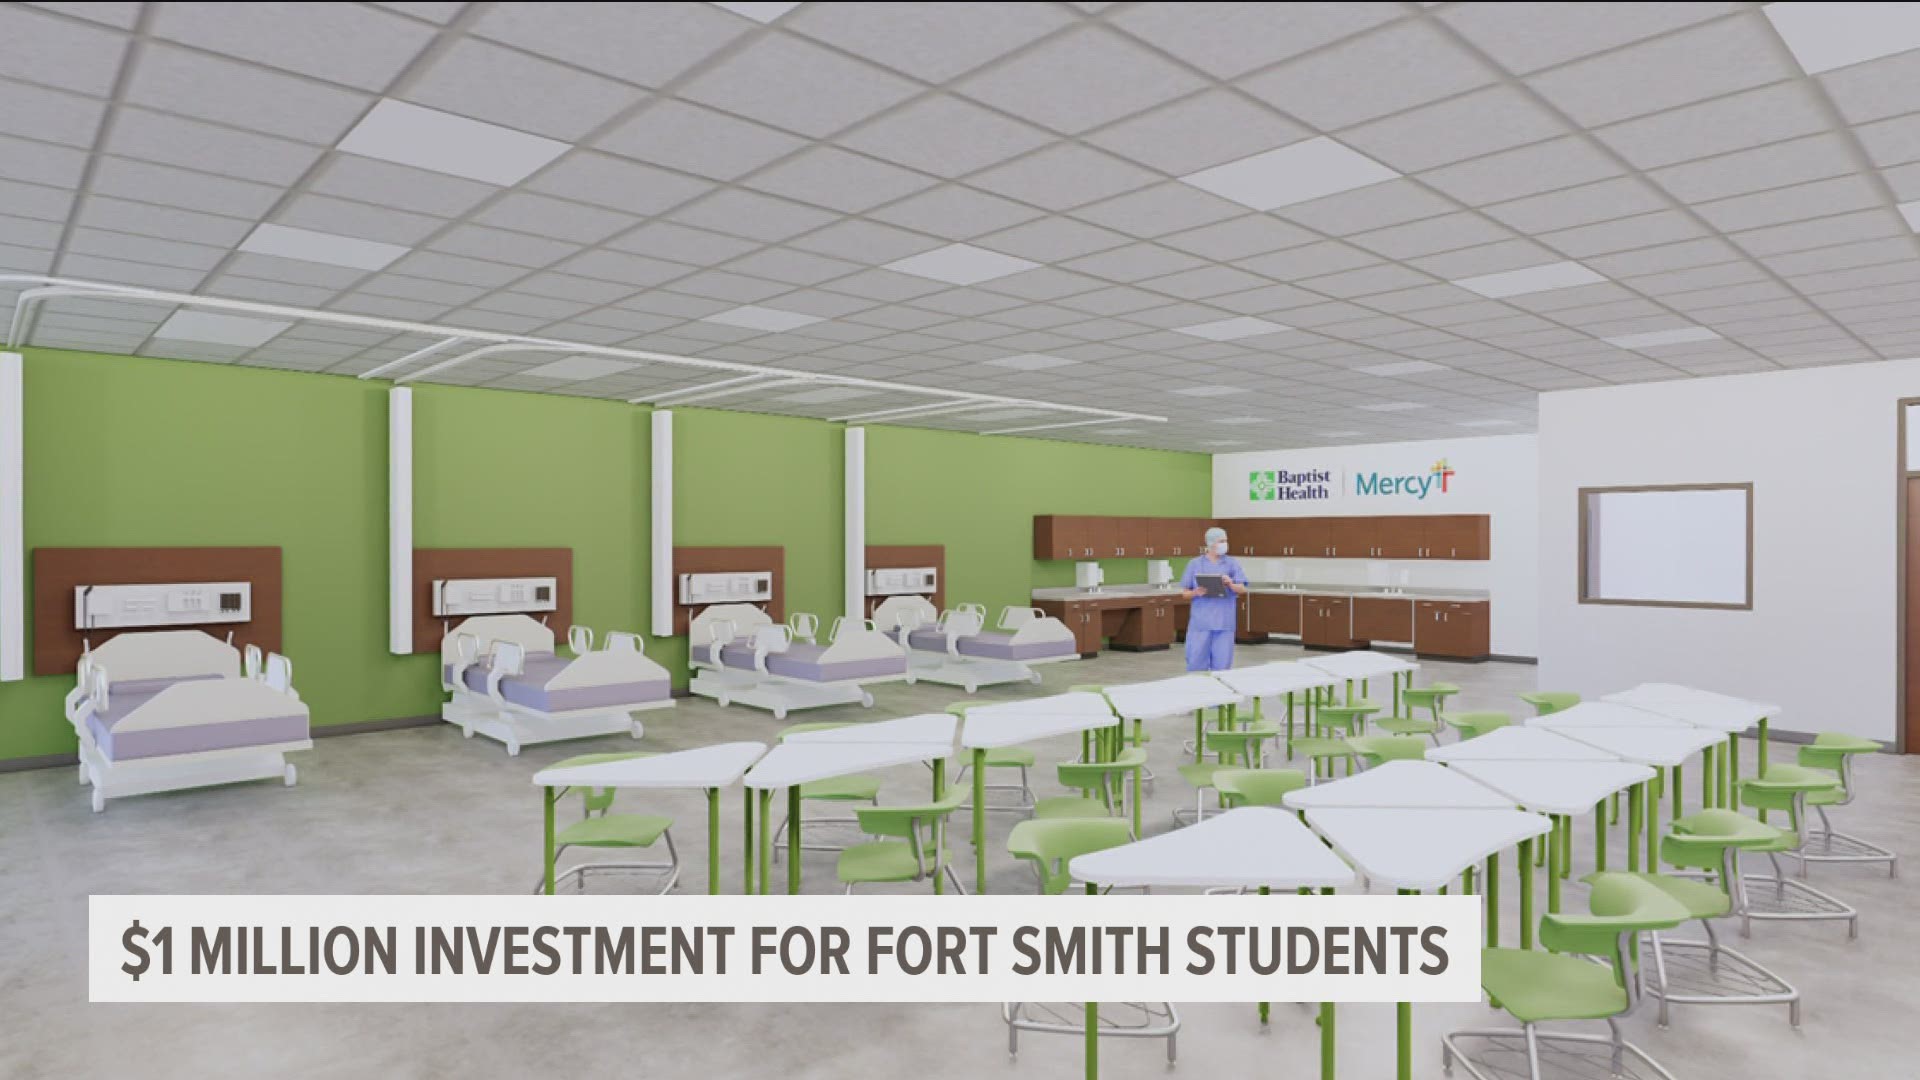 Their investment, $500,000 each, will help boost the quality of healthcare-related teaching to Fort Smith Public Schools students.